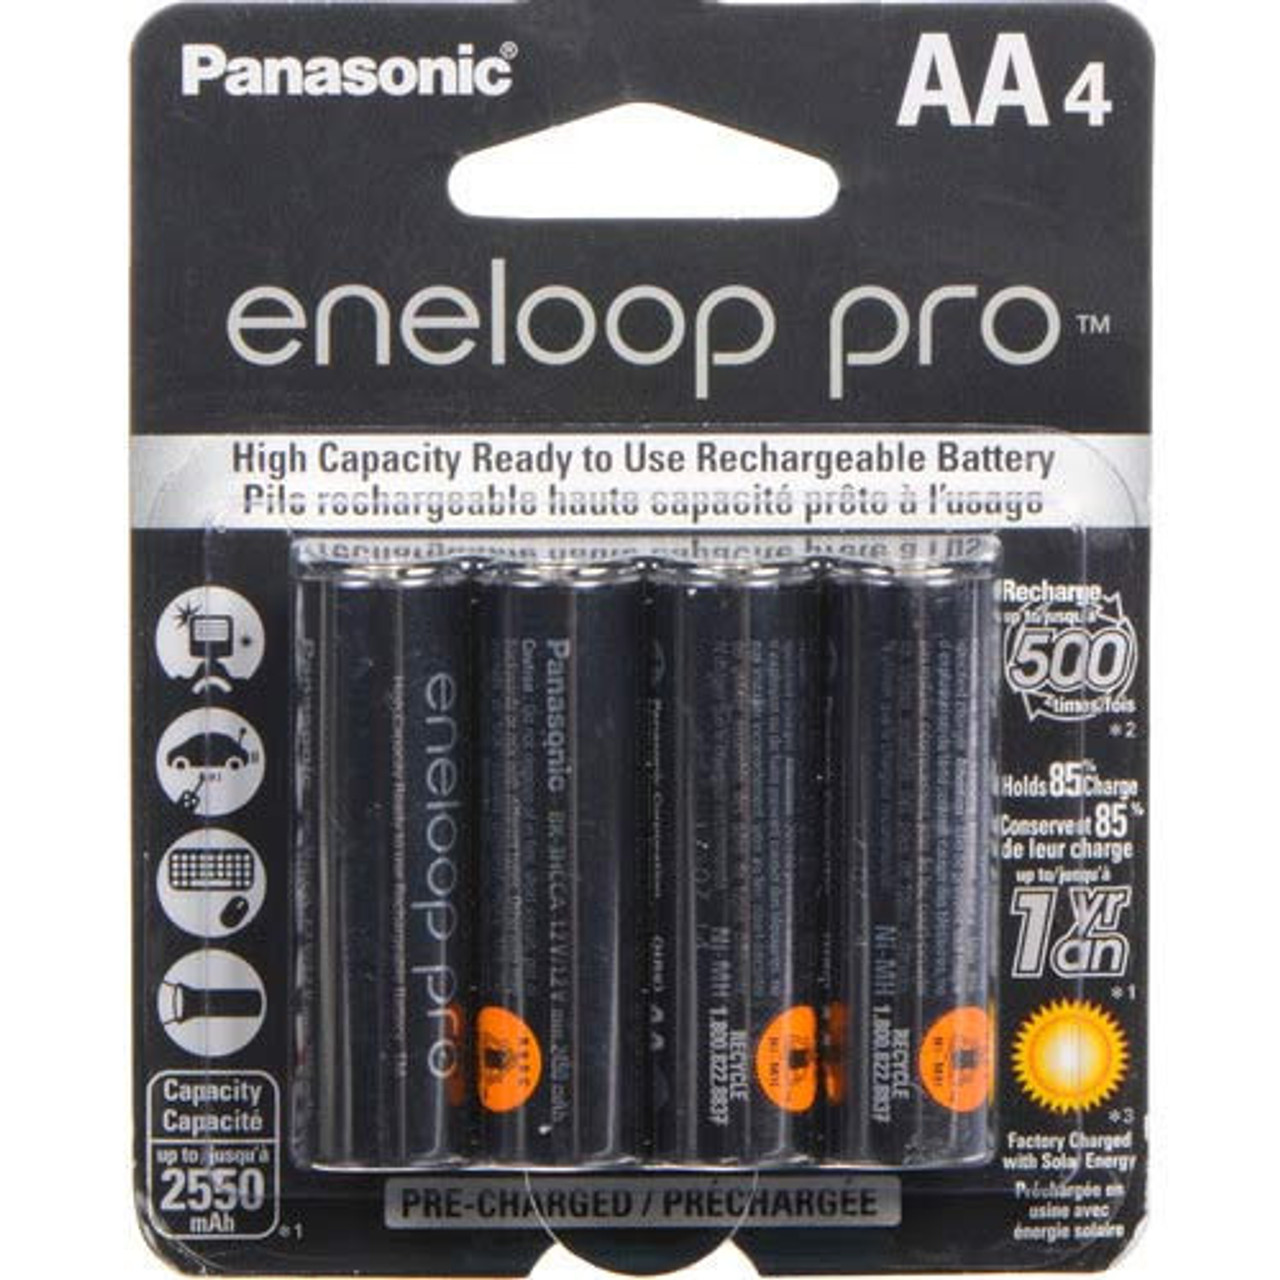 Panasonic eneloop Pro Rechargeable AA Ni-MH Batteries with Charger -  CameraLK